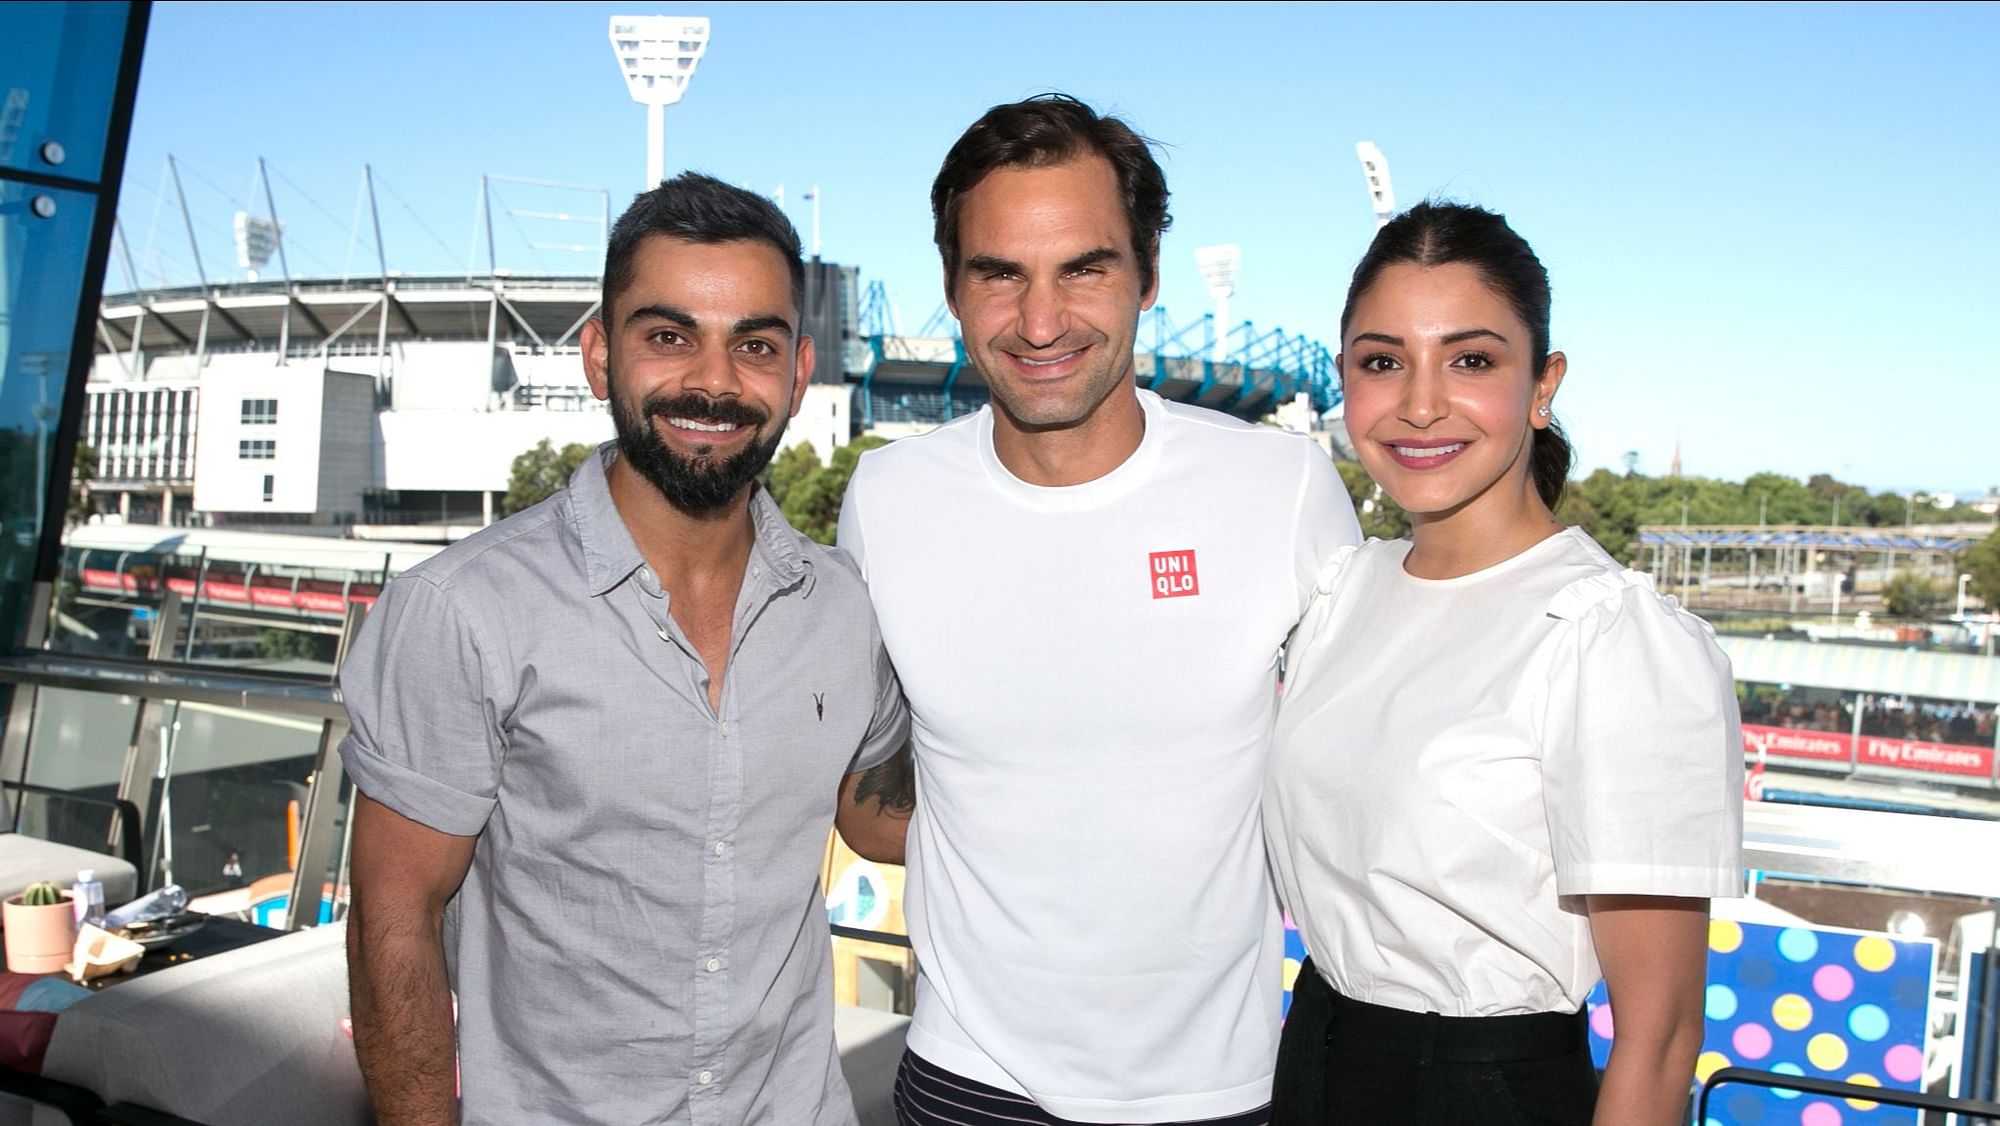 Indian cricket captain Virat Kohli and wife Anushka Sharma photographed with Roger Federer on Day 6 of the Australian Open 2019.